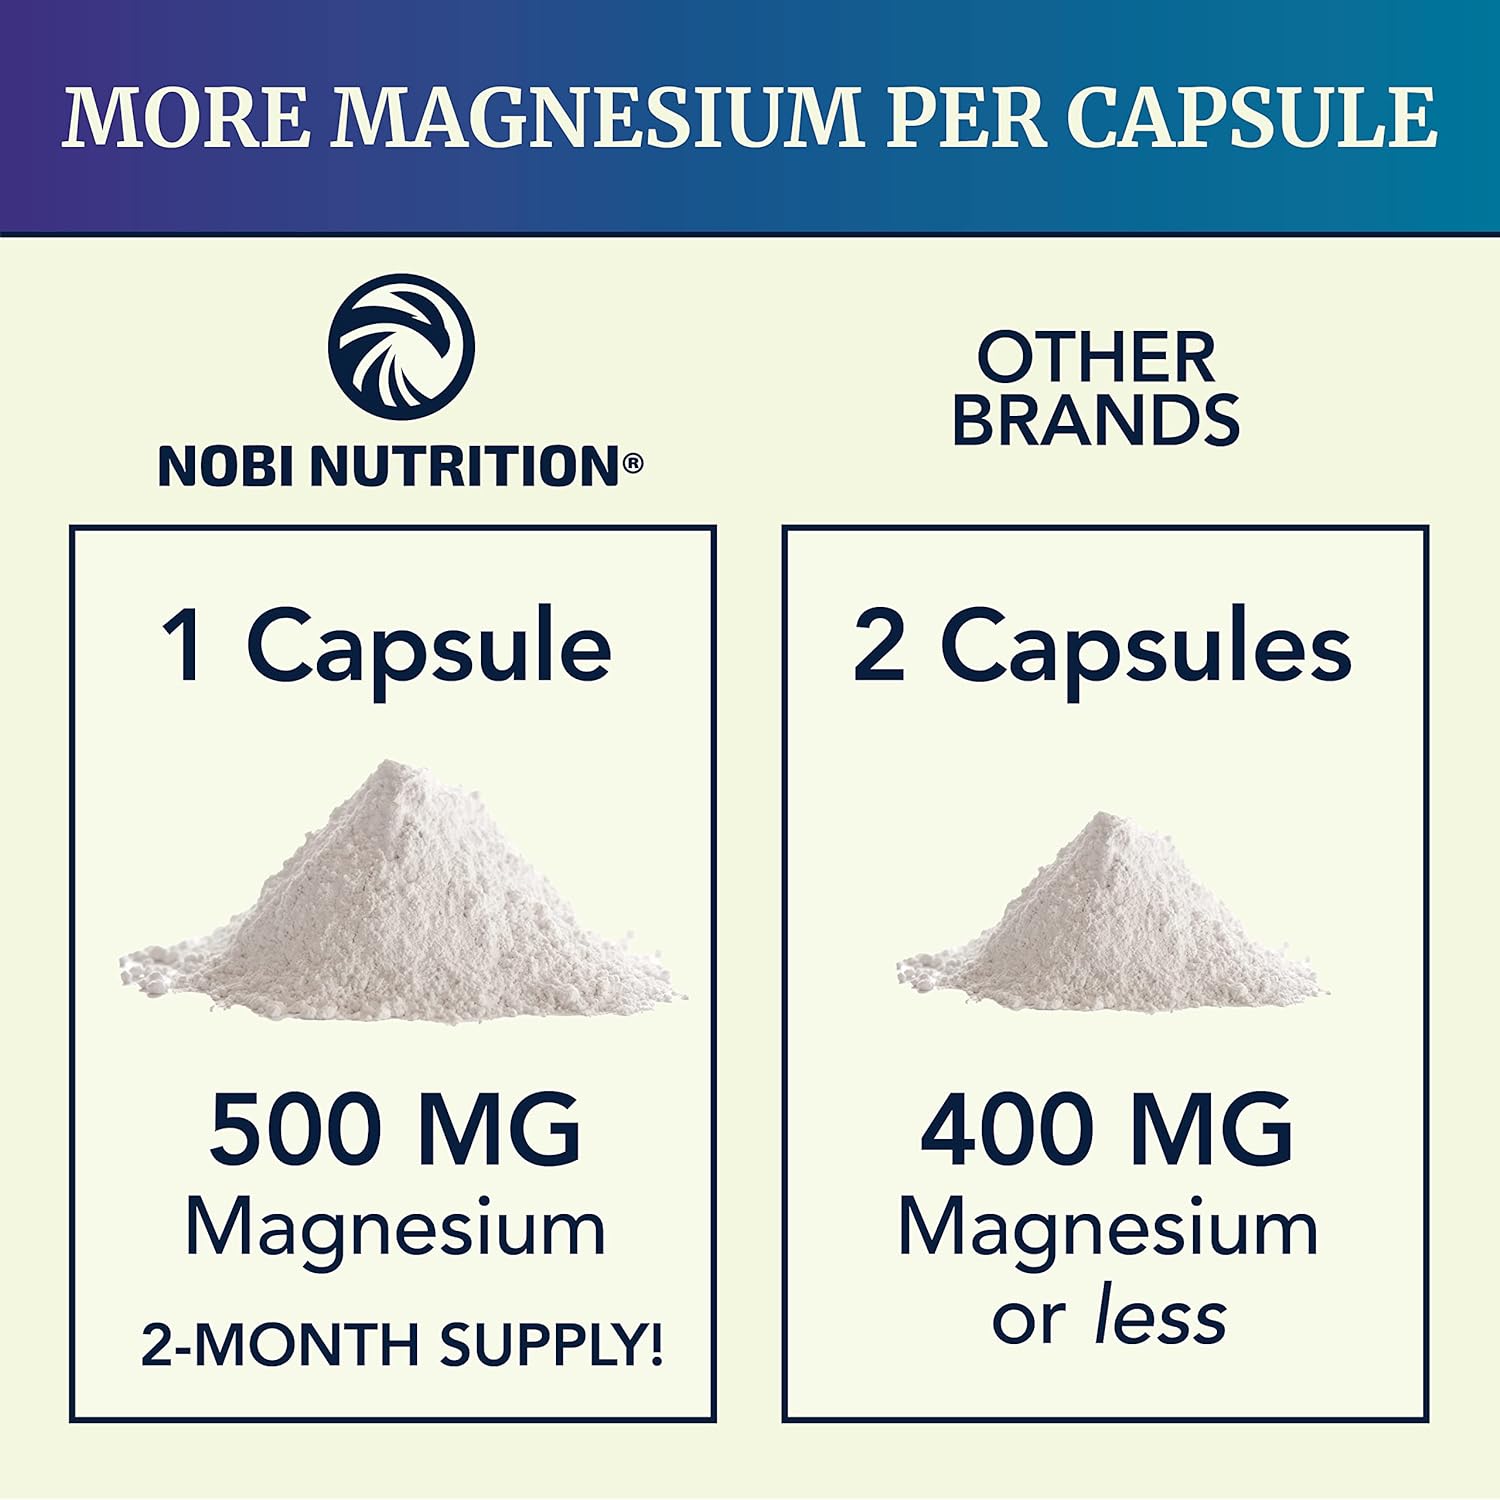 Magnesium Citrate Complex | 500 MG | Constipation Support | High Absorption Formula | Calm, Relaxation & Digestion Support Supplement with Elemental Magnesium Oxide | Gluten-Free, Soy-Free 60 Capsules - Premium Magnesium from Concordia Style Boutique - Just $43.30! Shop now at Concordia Style Boutique